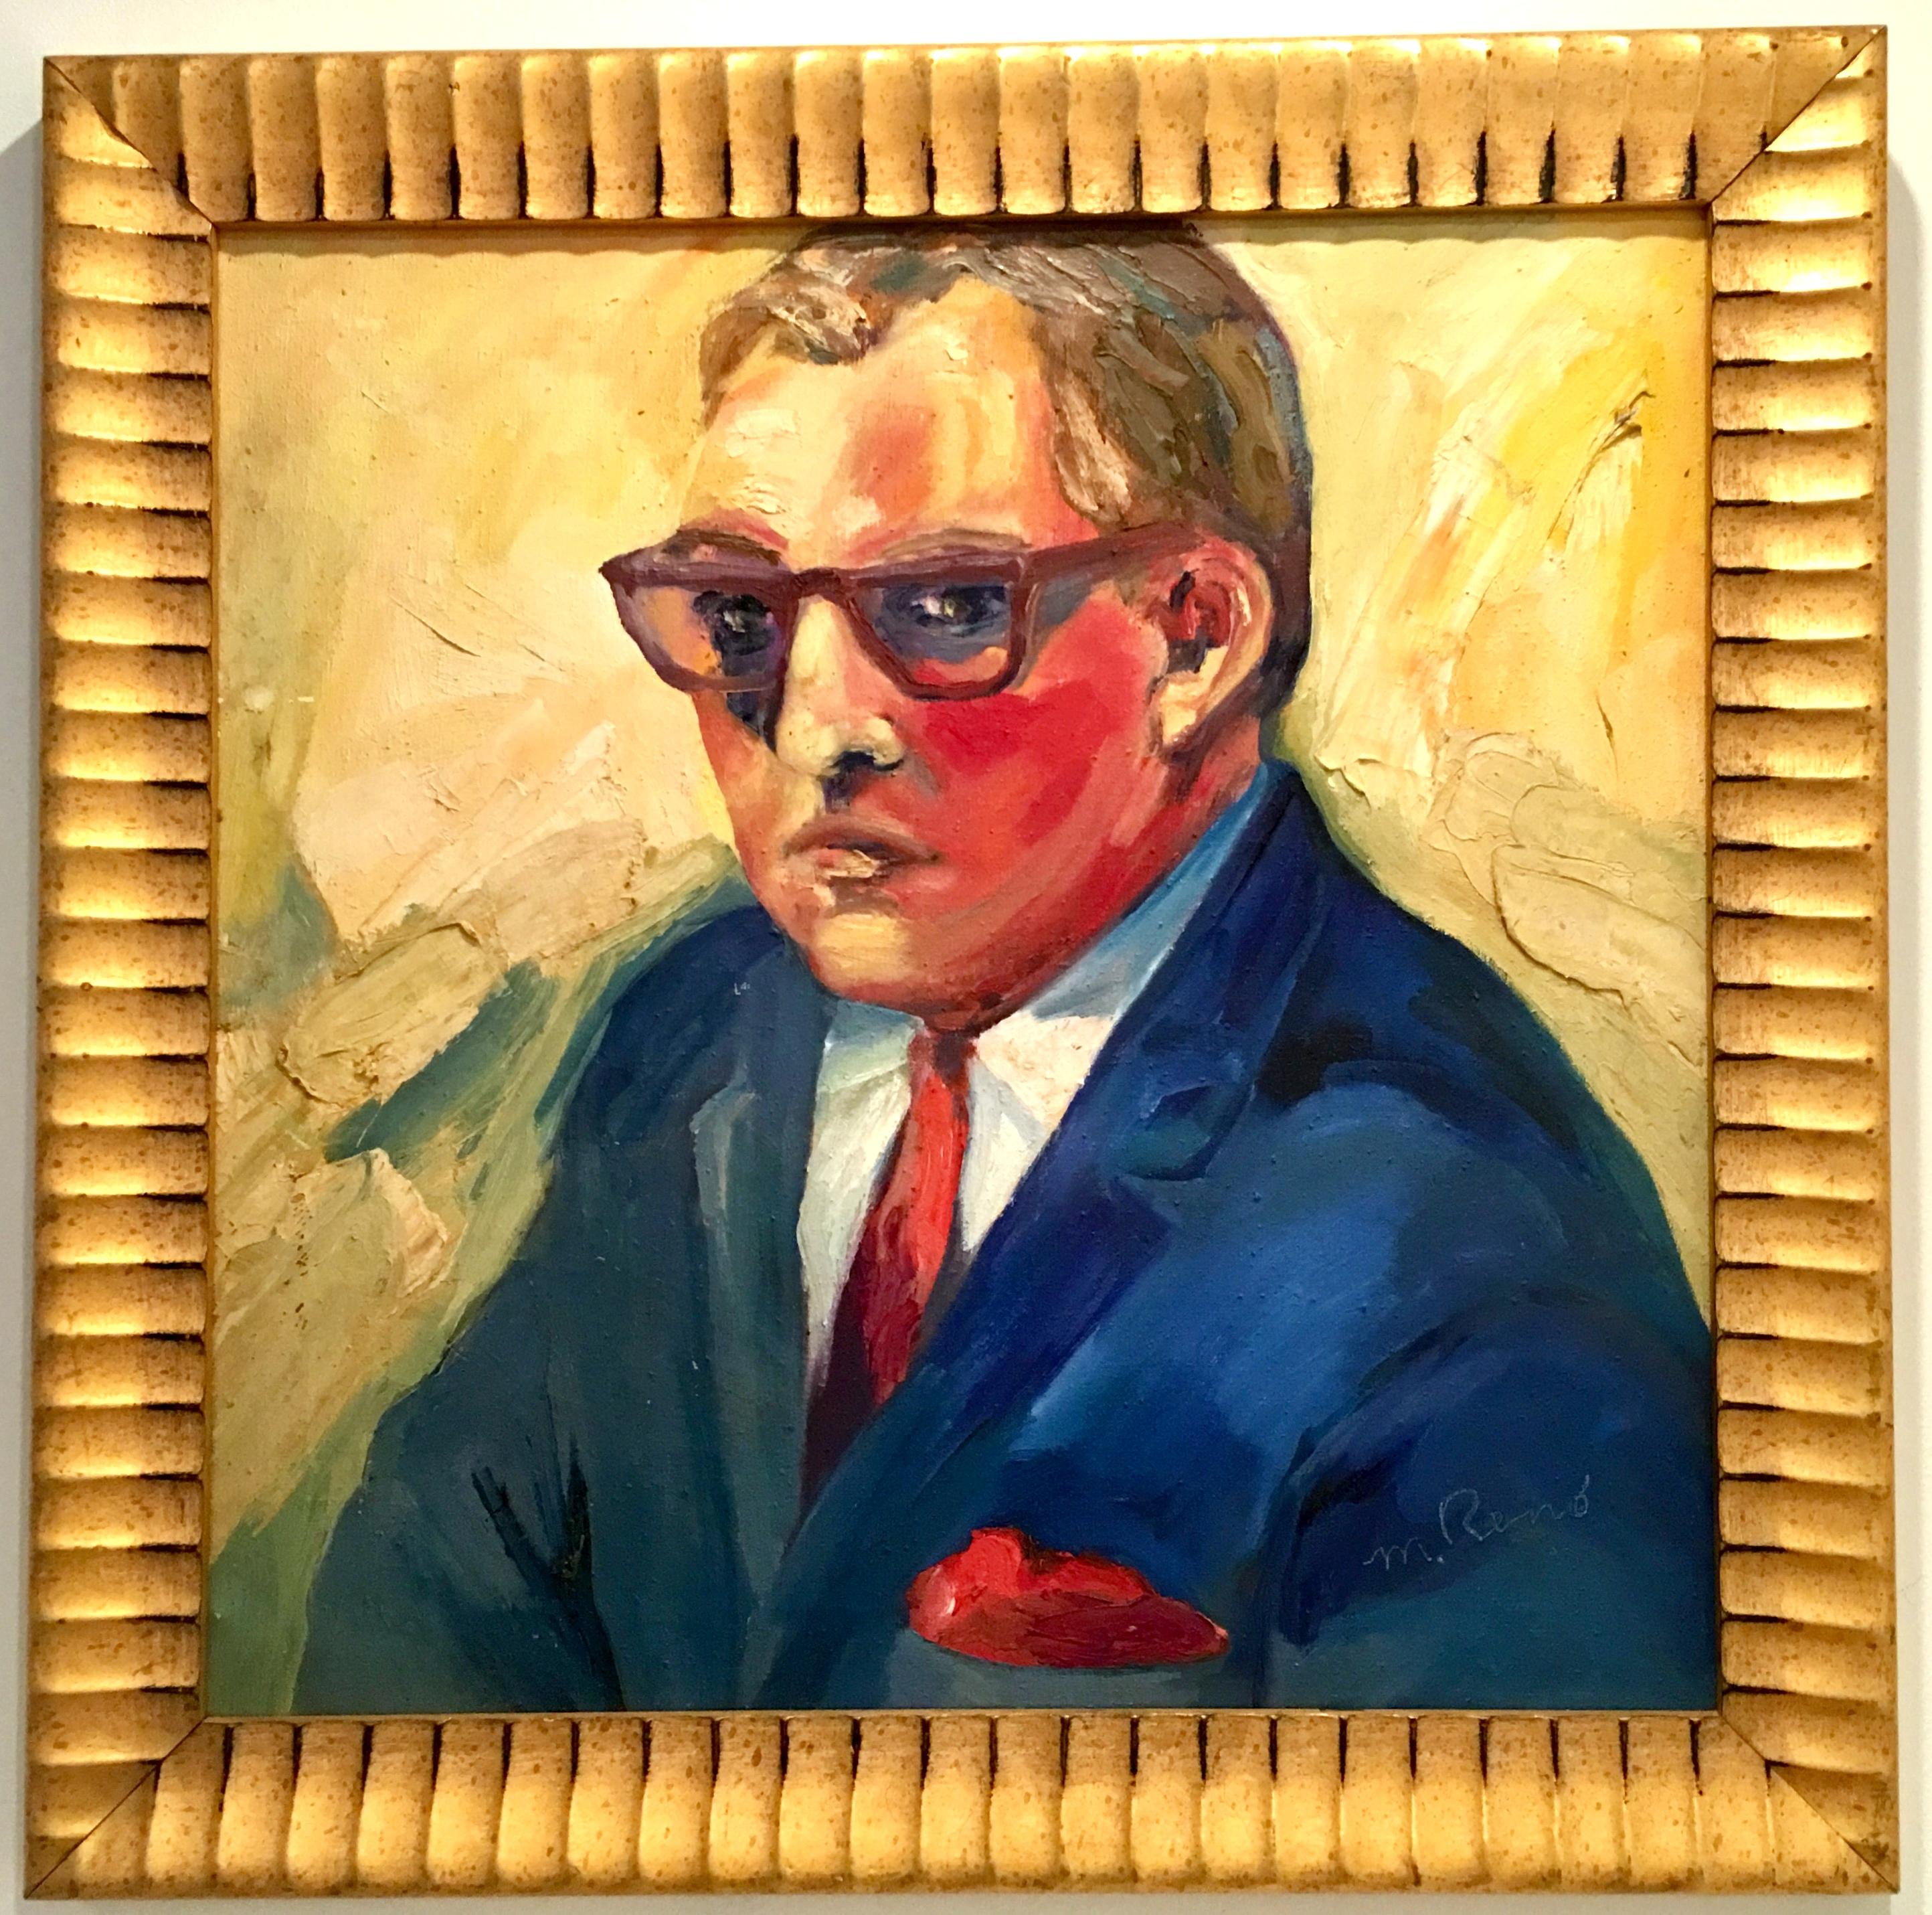 20th Century original oil on canvas painting by, M. Reno. This impasto style painting features a male portrait of a man in an electric blue suit with a red tie on mostly yellow background. Signed 